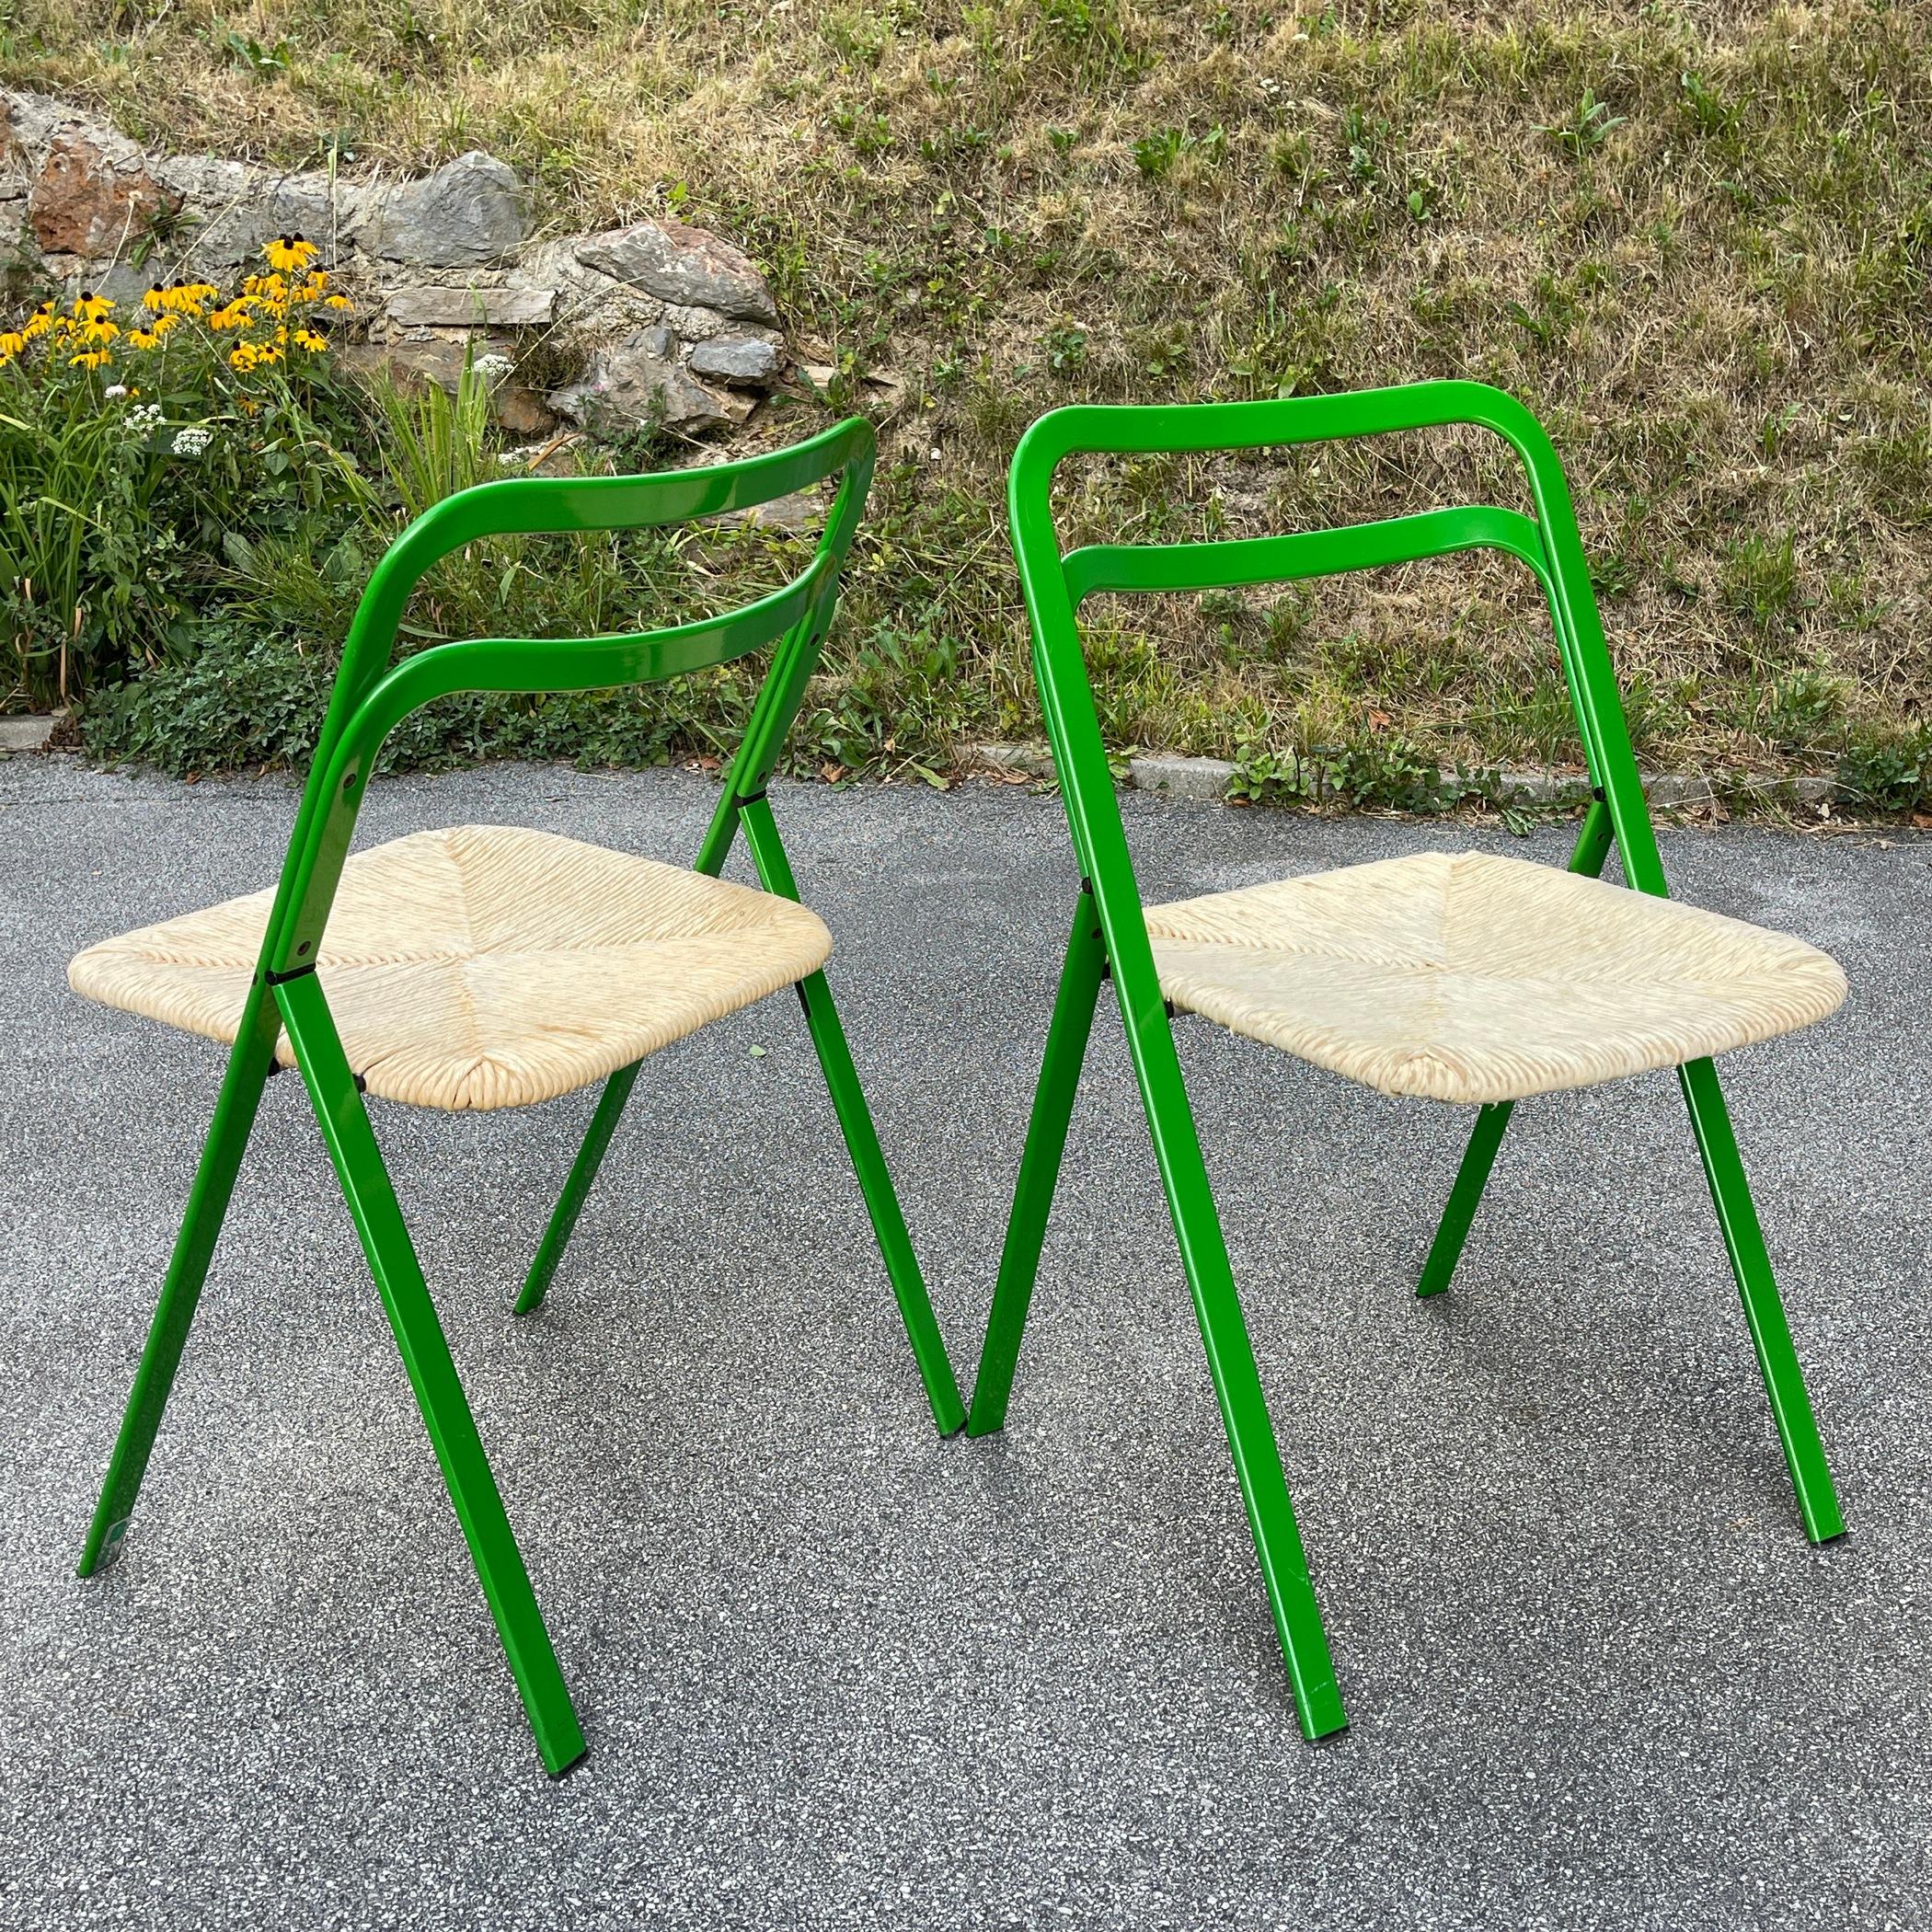 The amazing pair of mid-century folding chairs. This fantastic set was designed by Giorgio Cattelan and manufactured by Cidue in Italy in the 1970s. These chairs are a perfect example of mid-century design, very elegant in their simple lines and